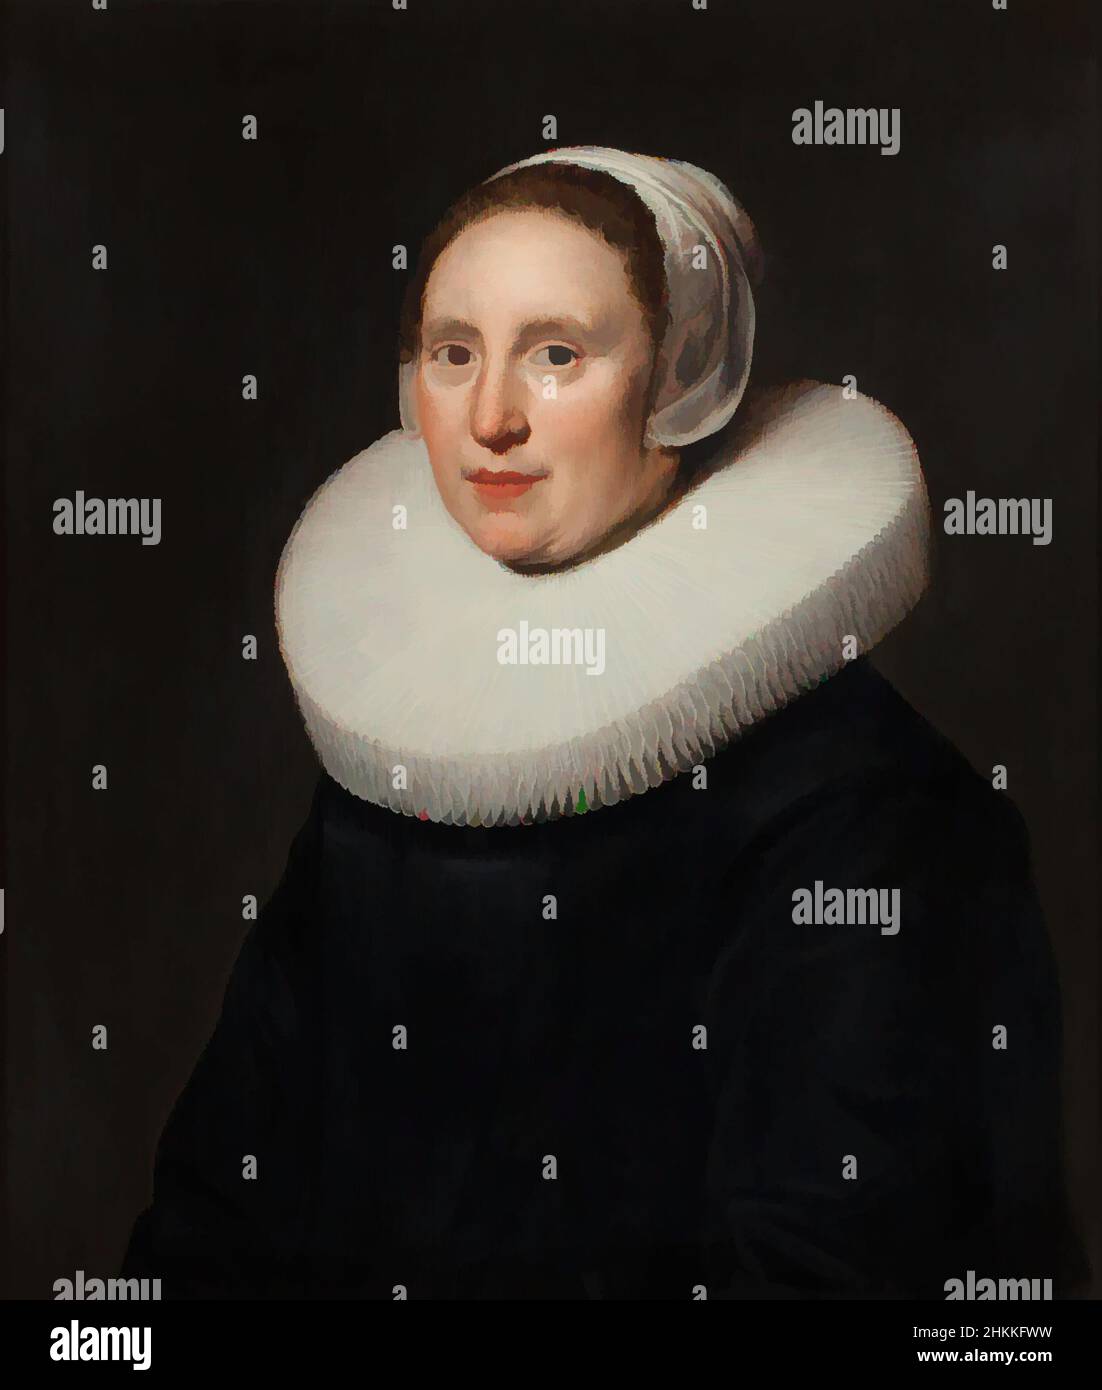 Art inspired by Portrait of Susanna Pietersdr Oostdijk b. 1597, Jan Westerbaen de Oude, 1647, Classic works modernized by Artotop with a splash of modernity. Shapes, color and value, eye-catching visual impact on art. Emotions through freedom of artworks in a contemporary way. A timeless message pursuing a wildly creative new direction. Artists turning to the digital medium and creating the Artotop NFT Stock Photo